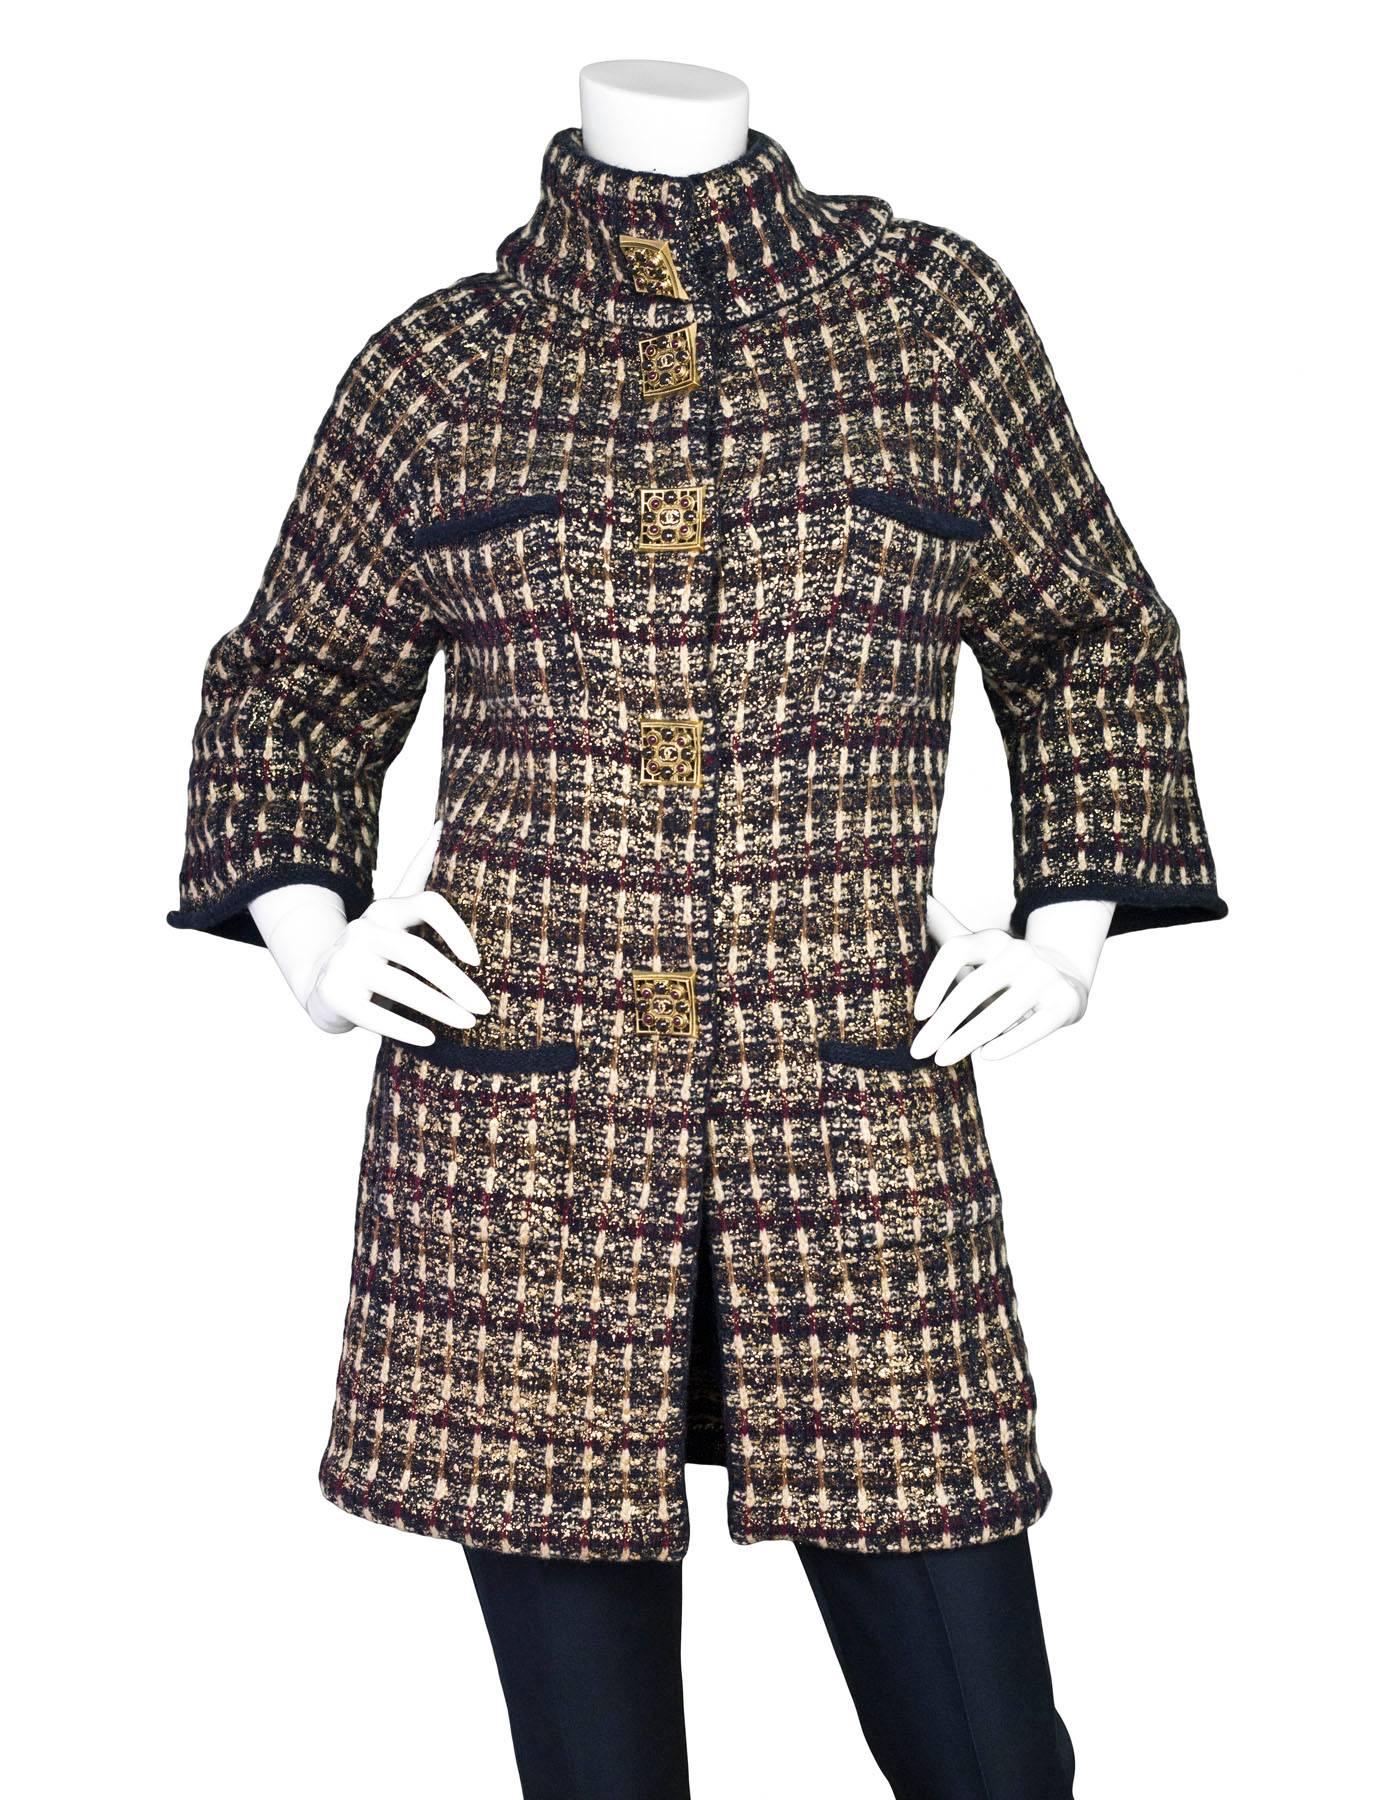 Chanel Wool & Cashmere Metiers d'Art Paris-Byzance Sweater Coat Sz FR38
Features gold detail throughout

Made In: Italy
Year of Production: 2011
Color: Black, gold, burgundy
Composition: 60% Wool, 40% Cashmere
Lining: None
Closure/Opening: Snap